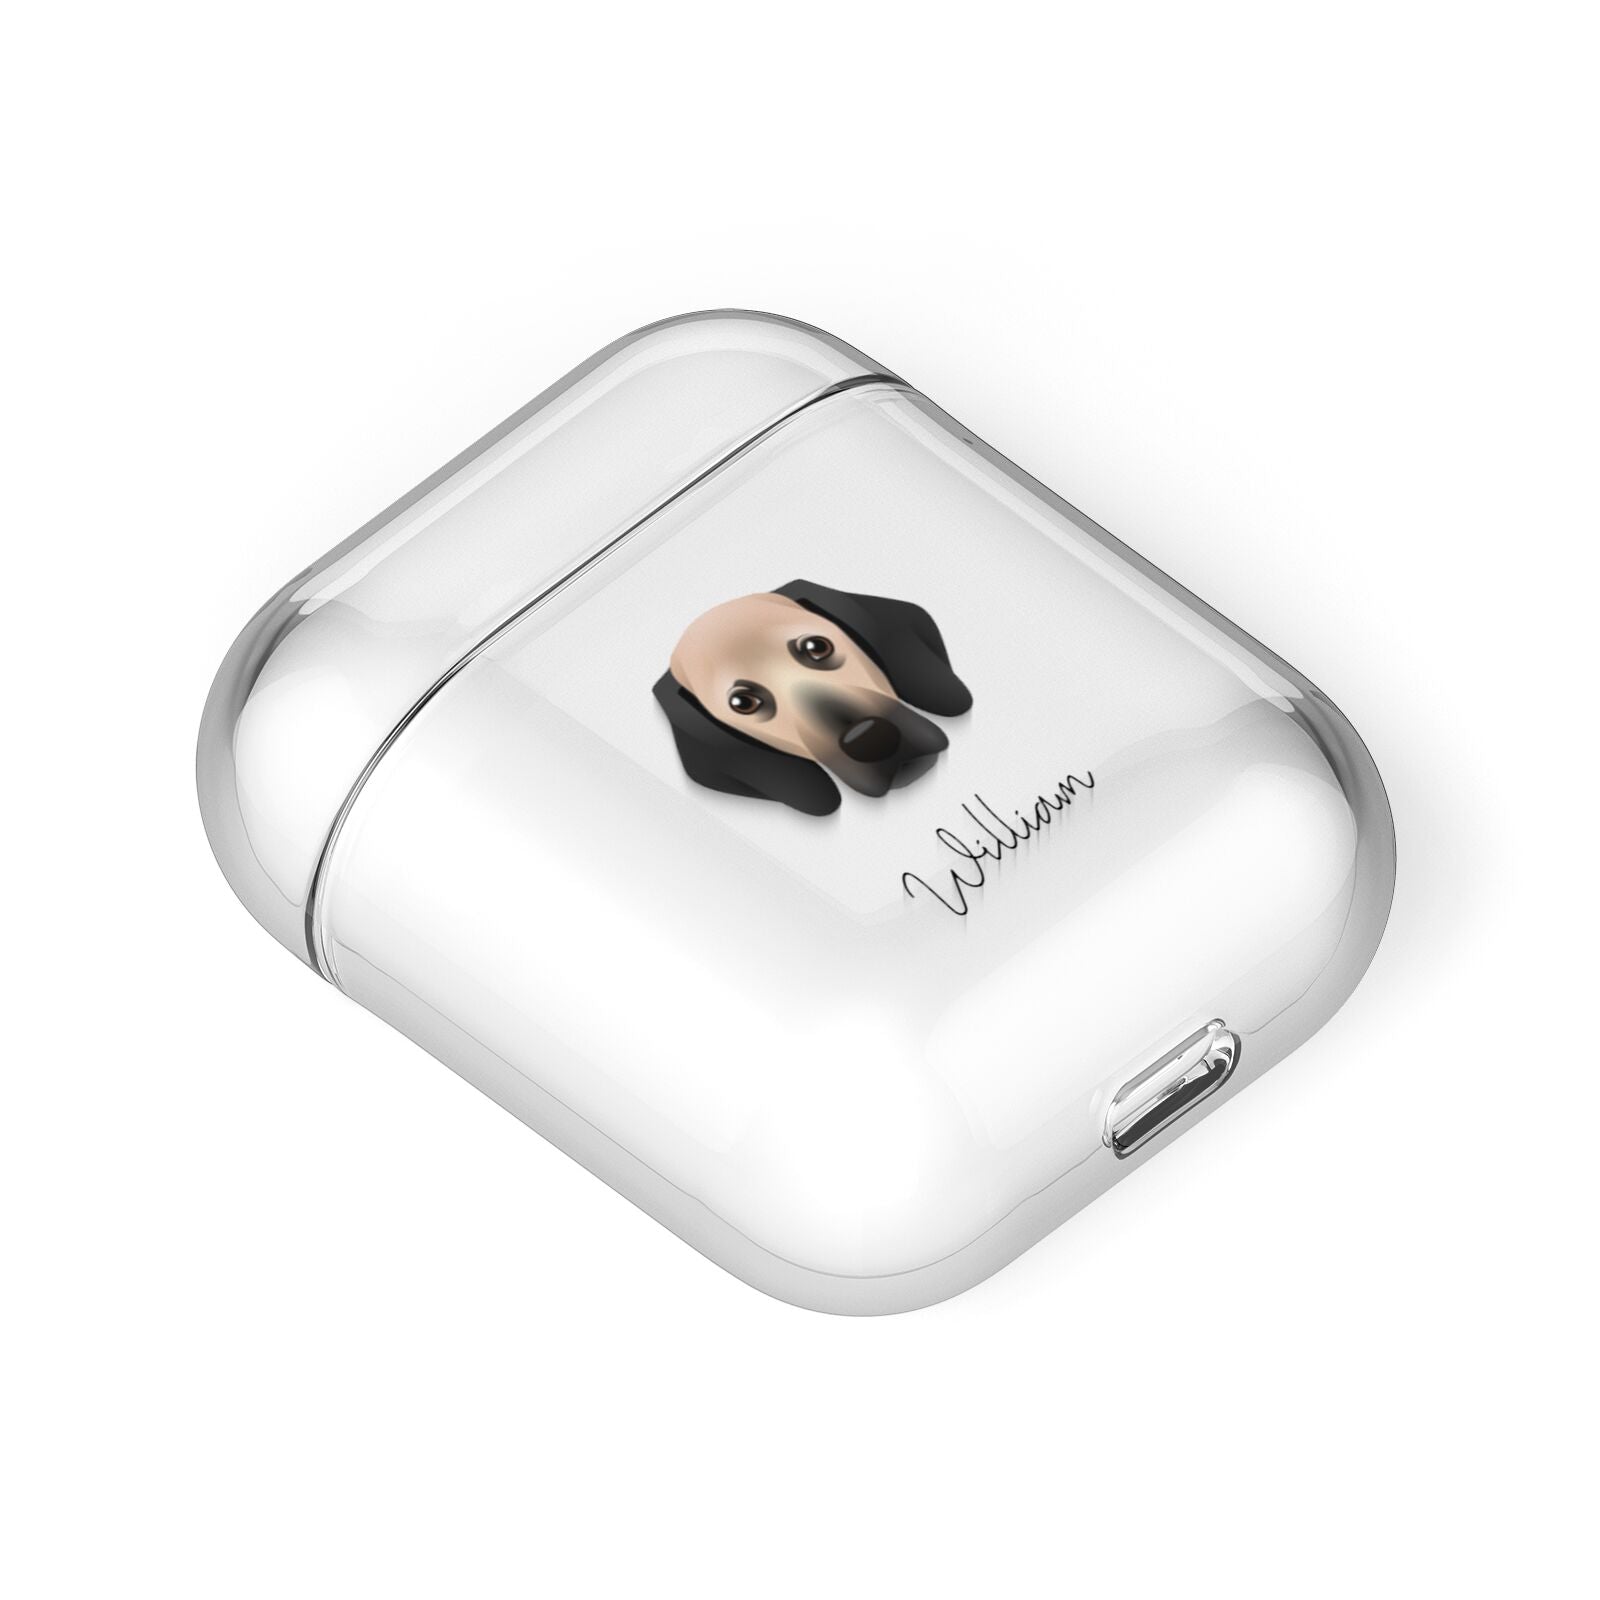 Bassugg Personalised AirPods Case Laid Flat